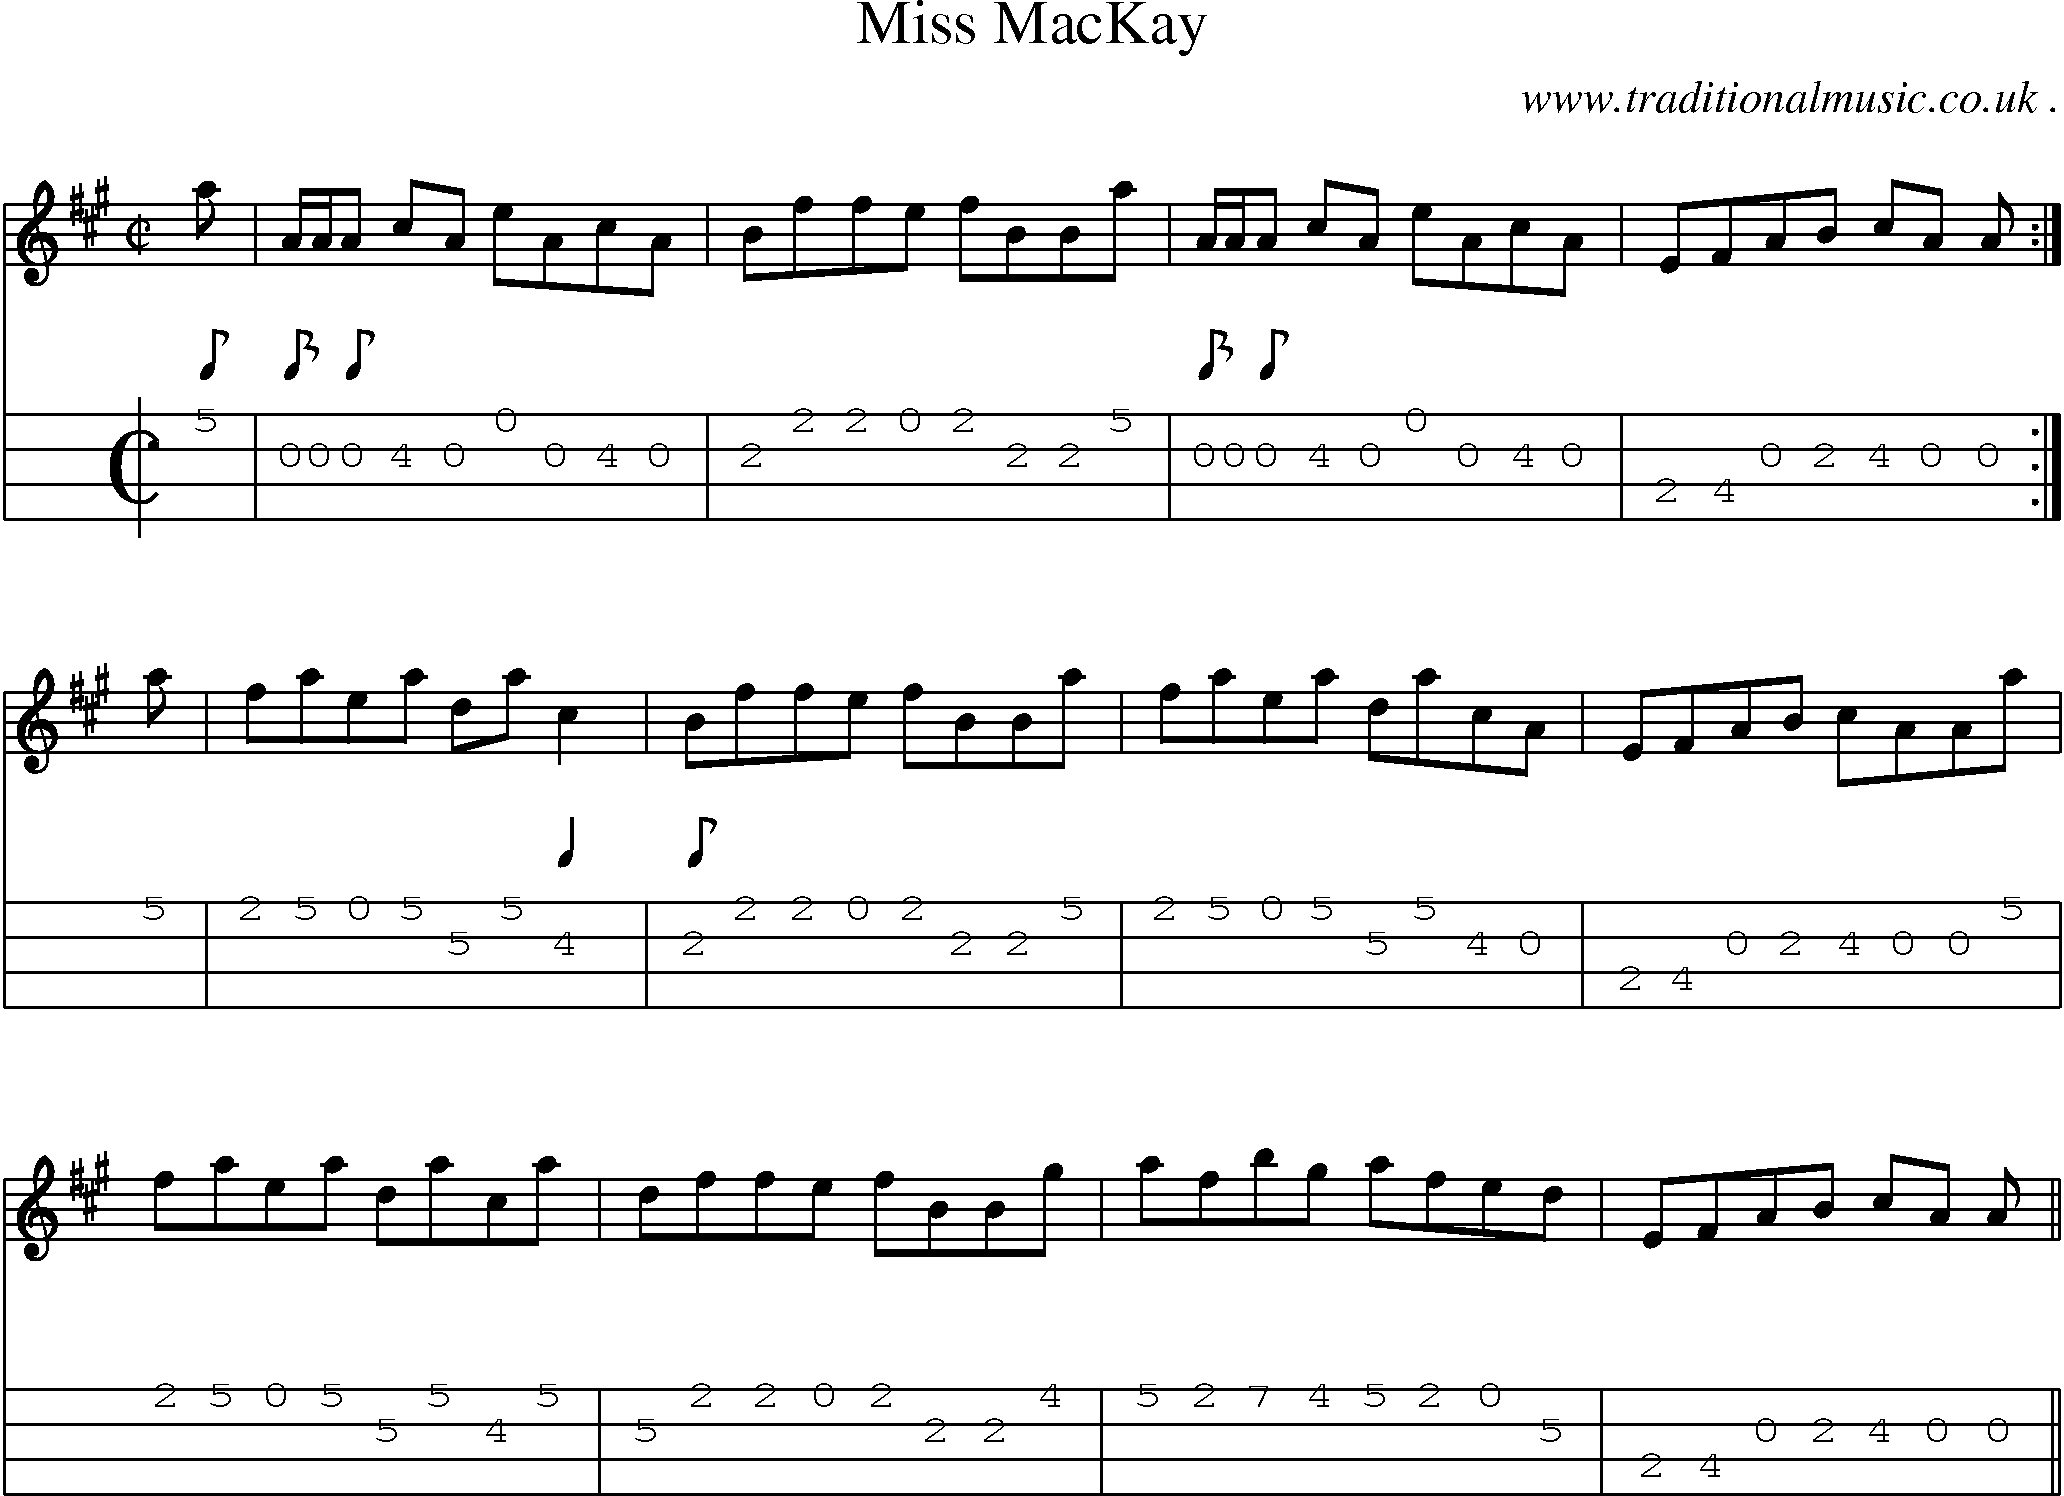 Sheet-music  score, Chords and Mandolin Tabs for Miss Mackay